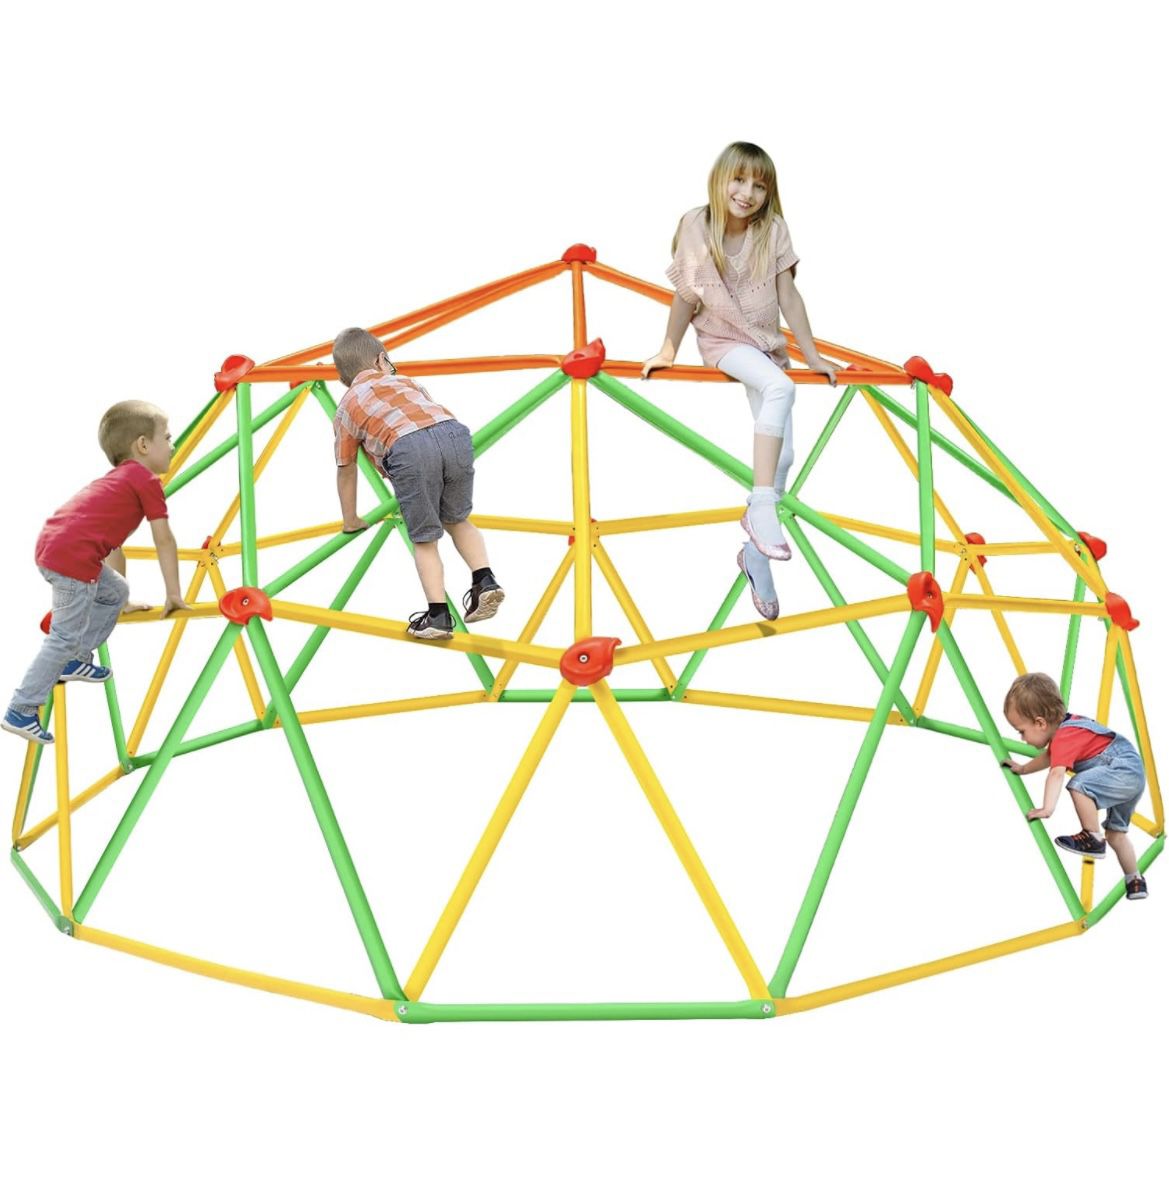 29-117 Climbing Dome Upgraded 10FT Climber for Kid 3-10 Jungle Gym Monkey Bar Backyard Geometric Support 800LBS Outdoor Play Equipment Toddler Outside